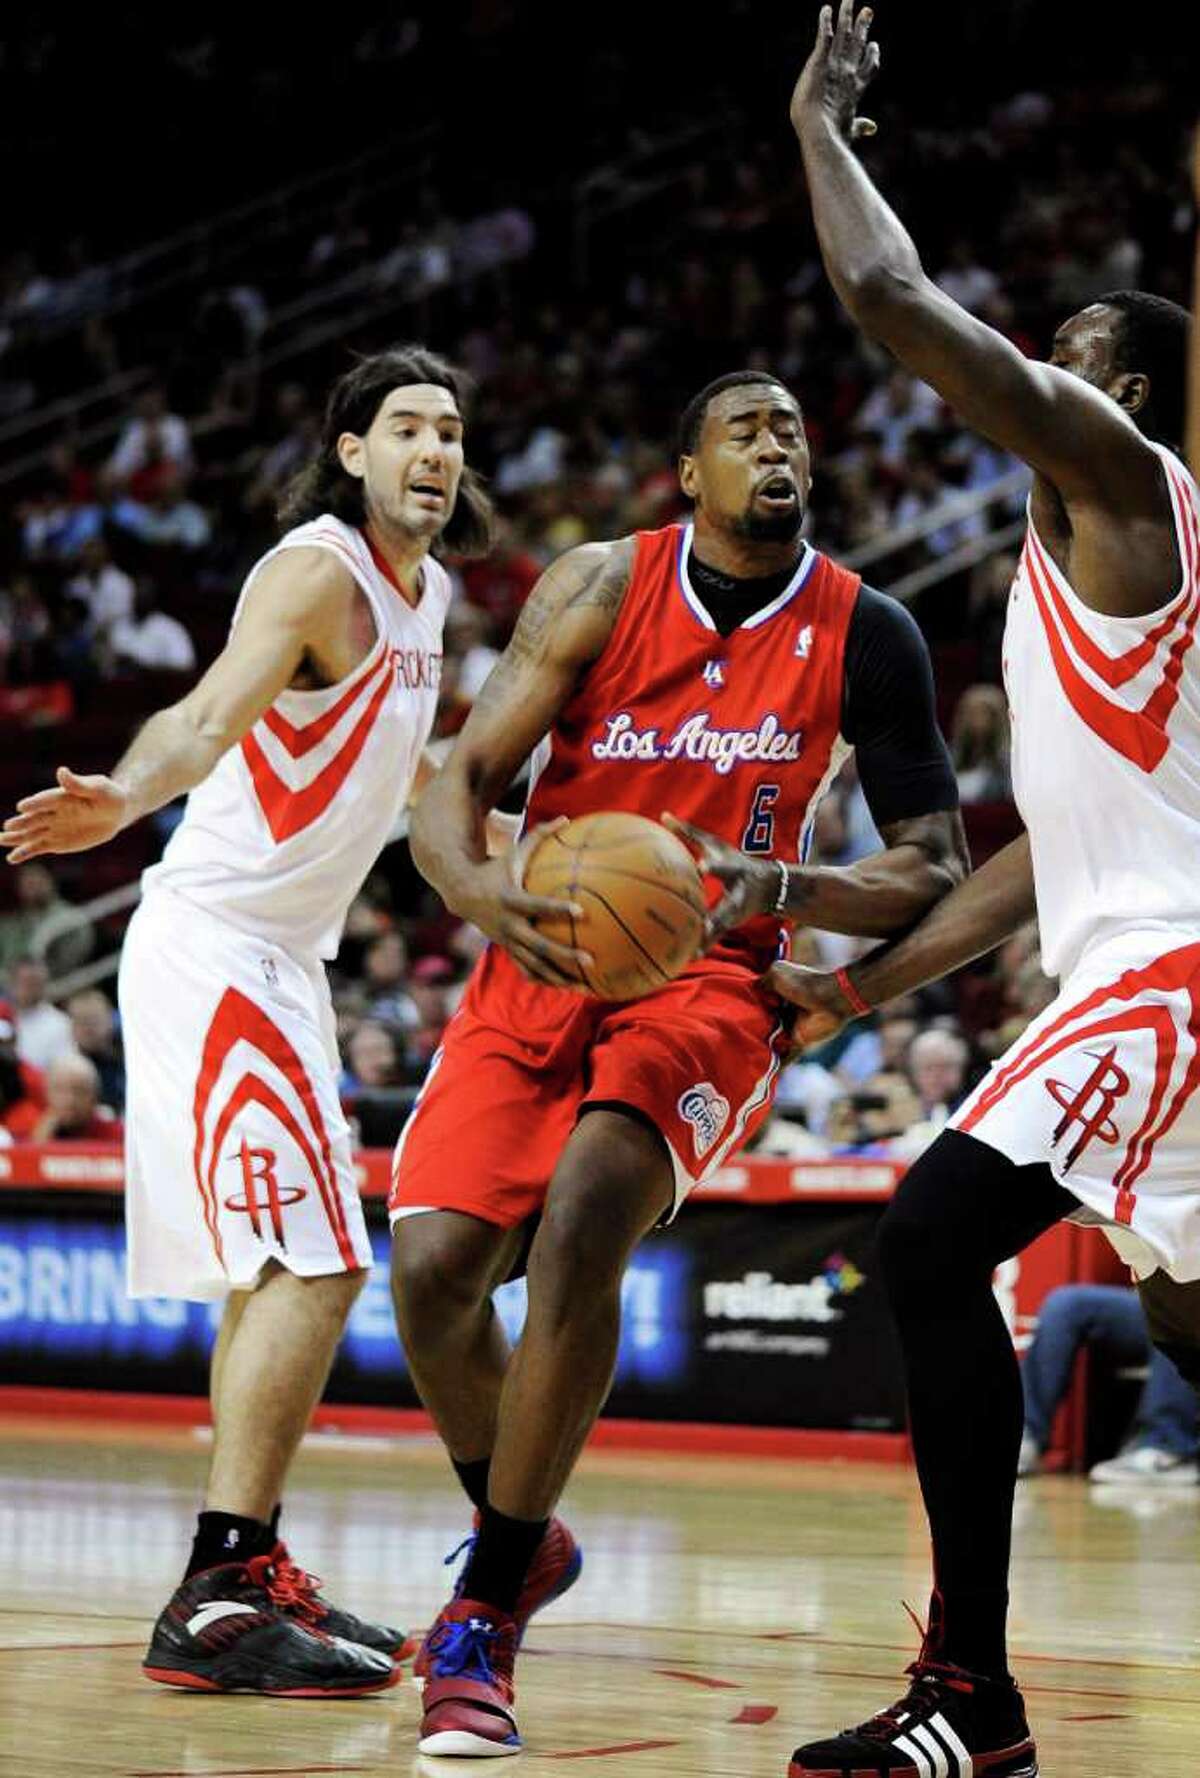 Los Angeles Clippers' DeAndre Jordan (6) drives to the basket between Houston Rockets' Luis Scola, left, and Samuel Dalembert, right, in the first half of an NBA basketball game, Sunday, March 4, 2012, in Houston. (AP Photo/Pat Sullivan)